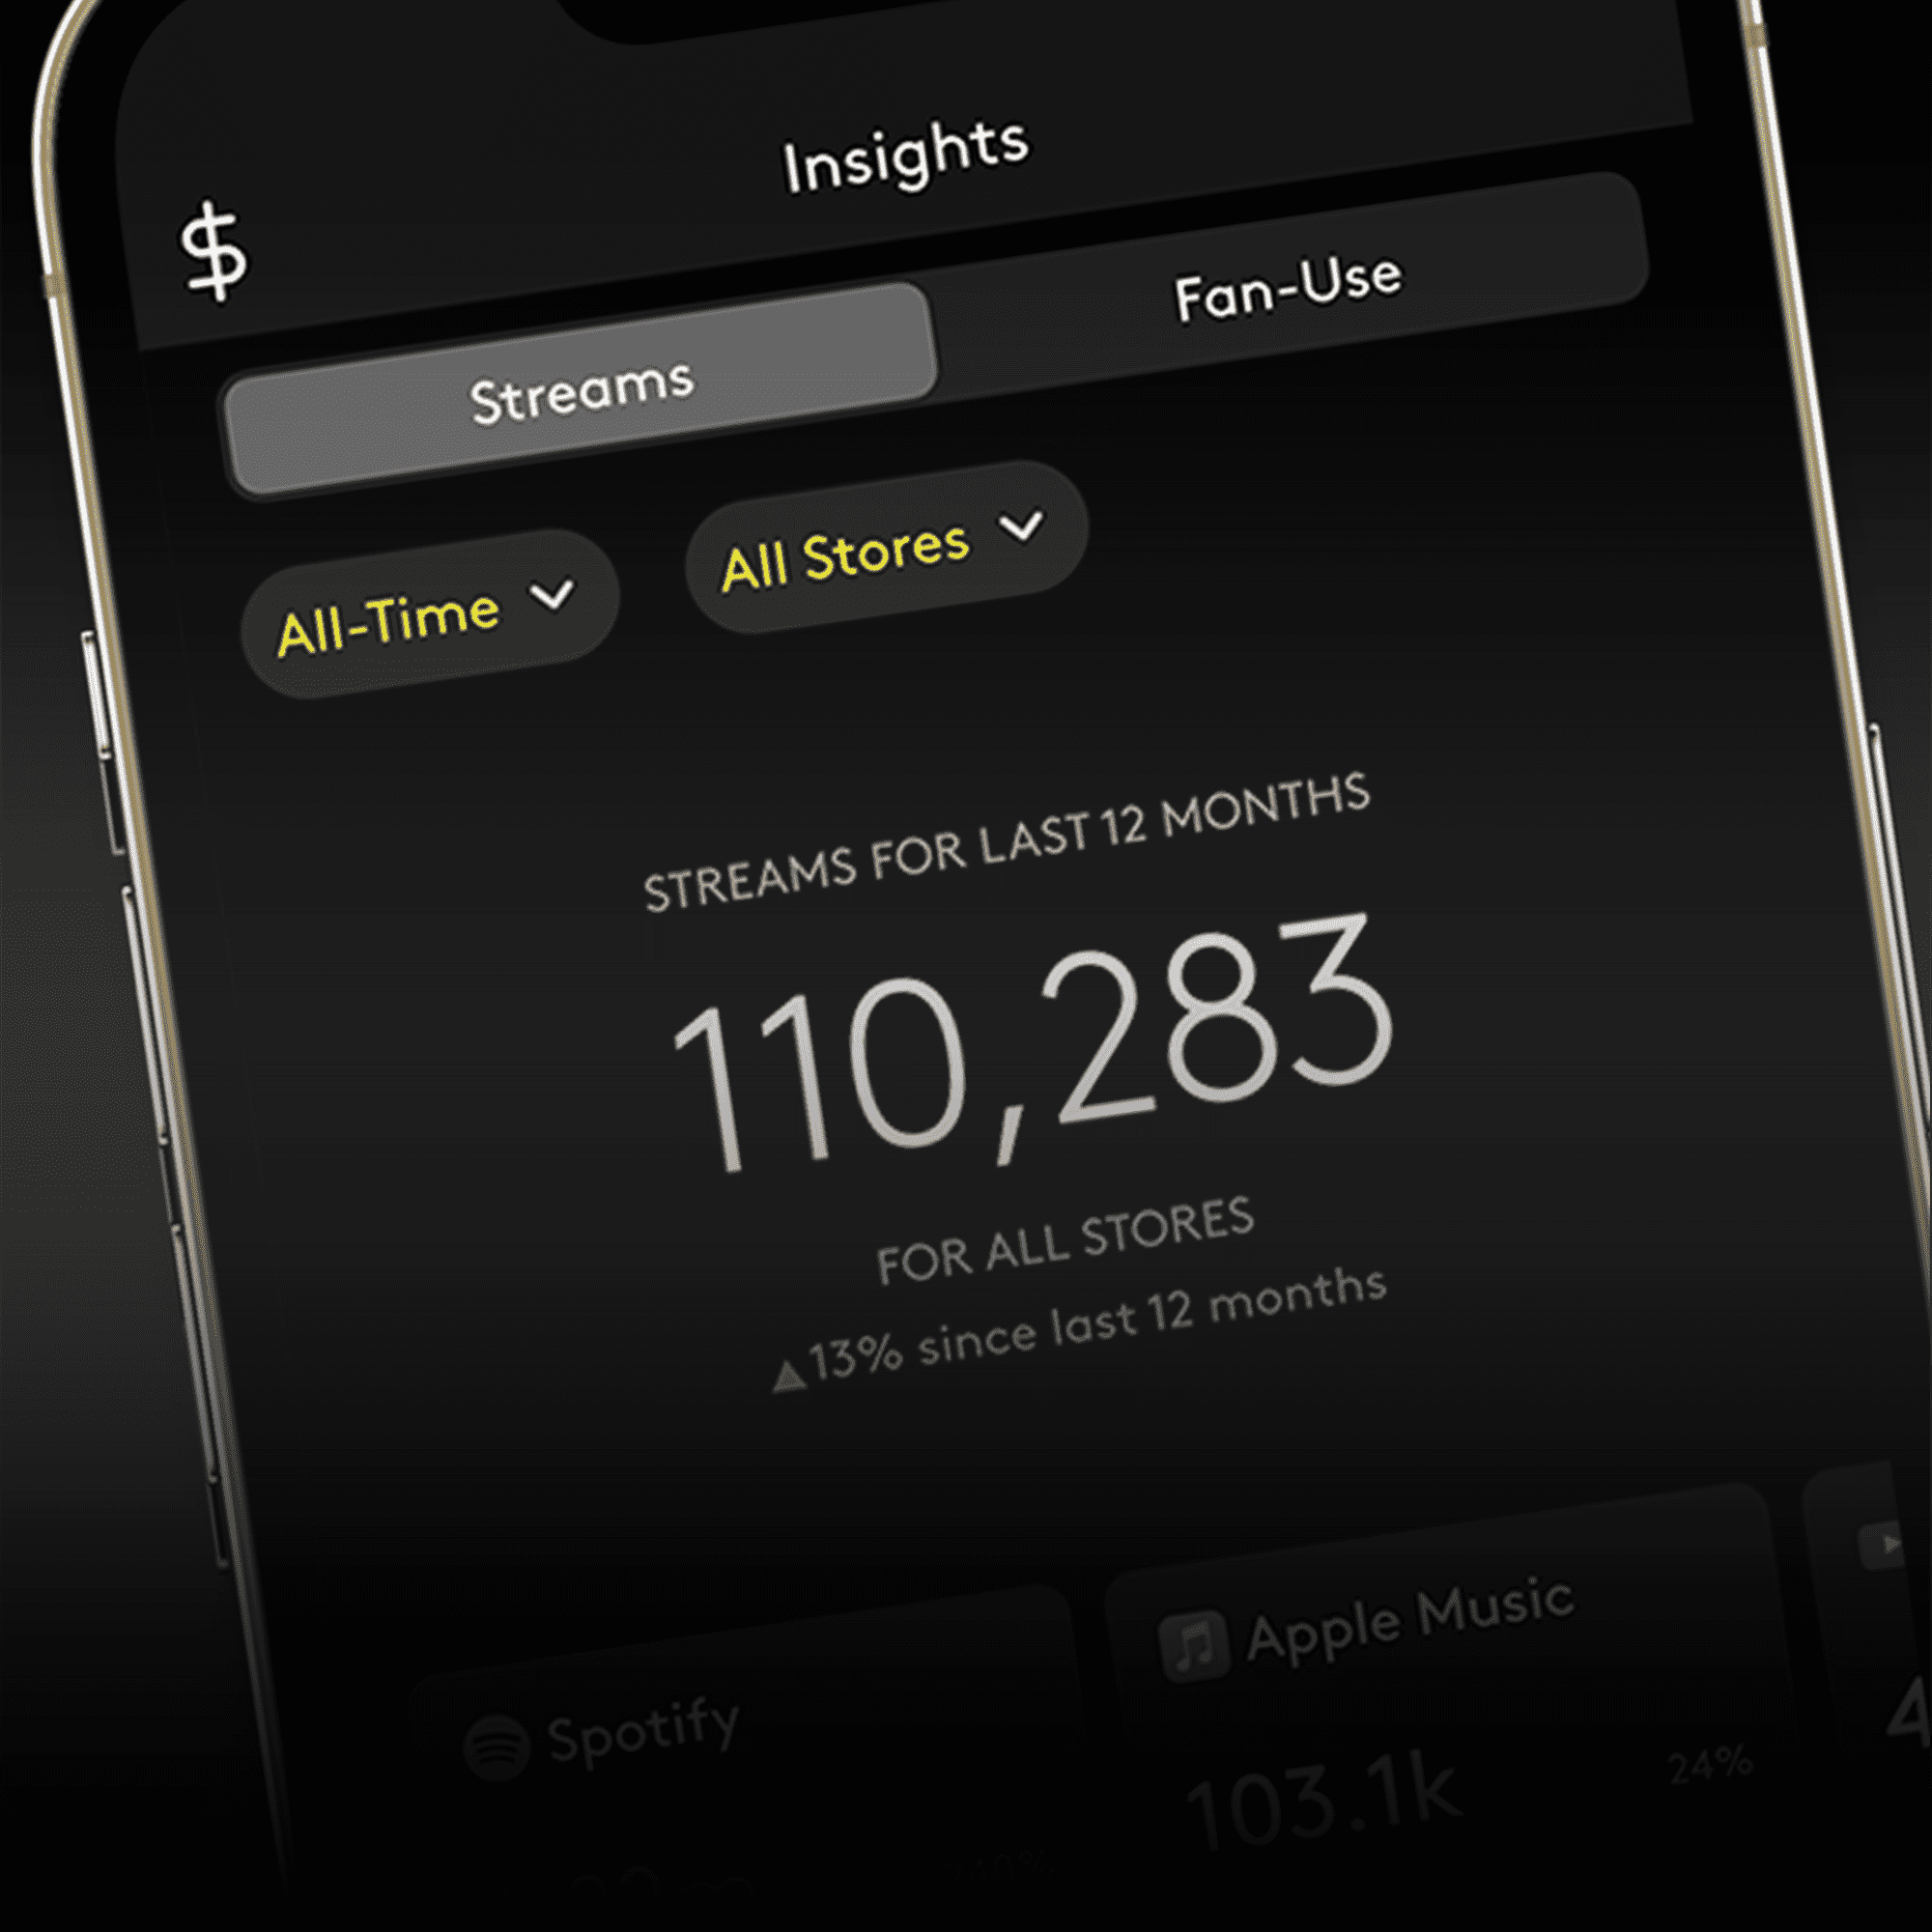 Screenshot of the Music Insights tab in the amuse mobile app, showing the amount of streams (110,283) for all stores during the last 12 months.